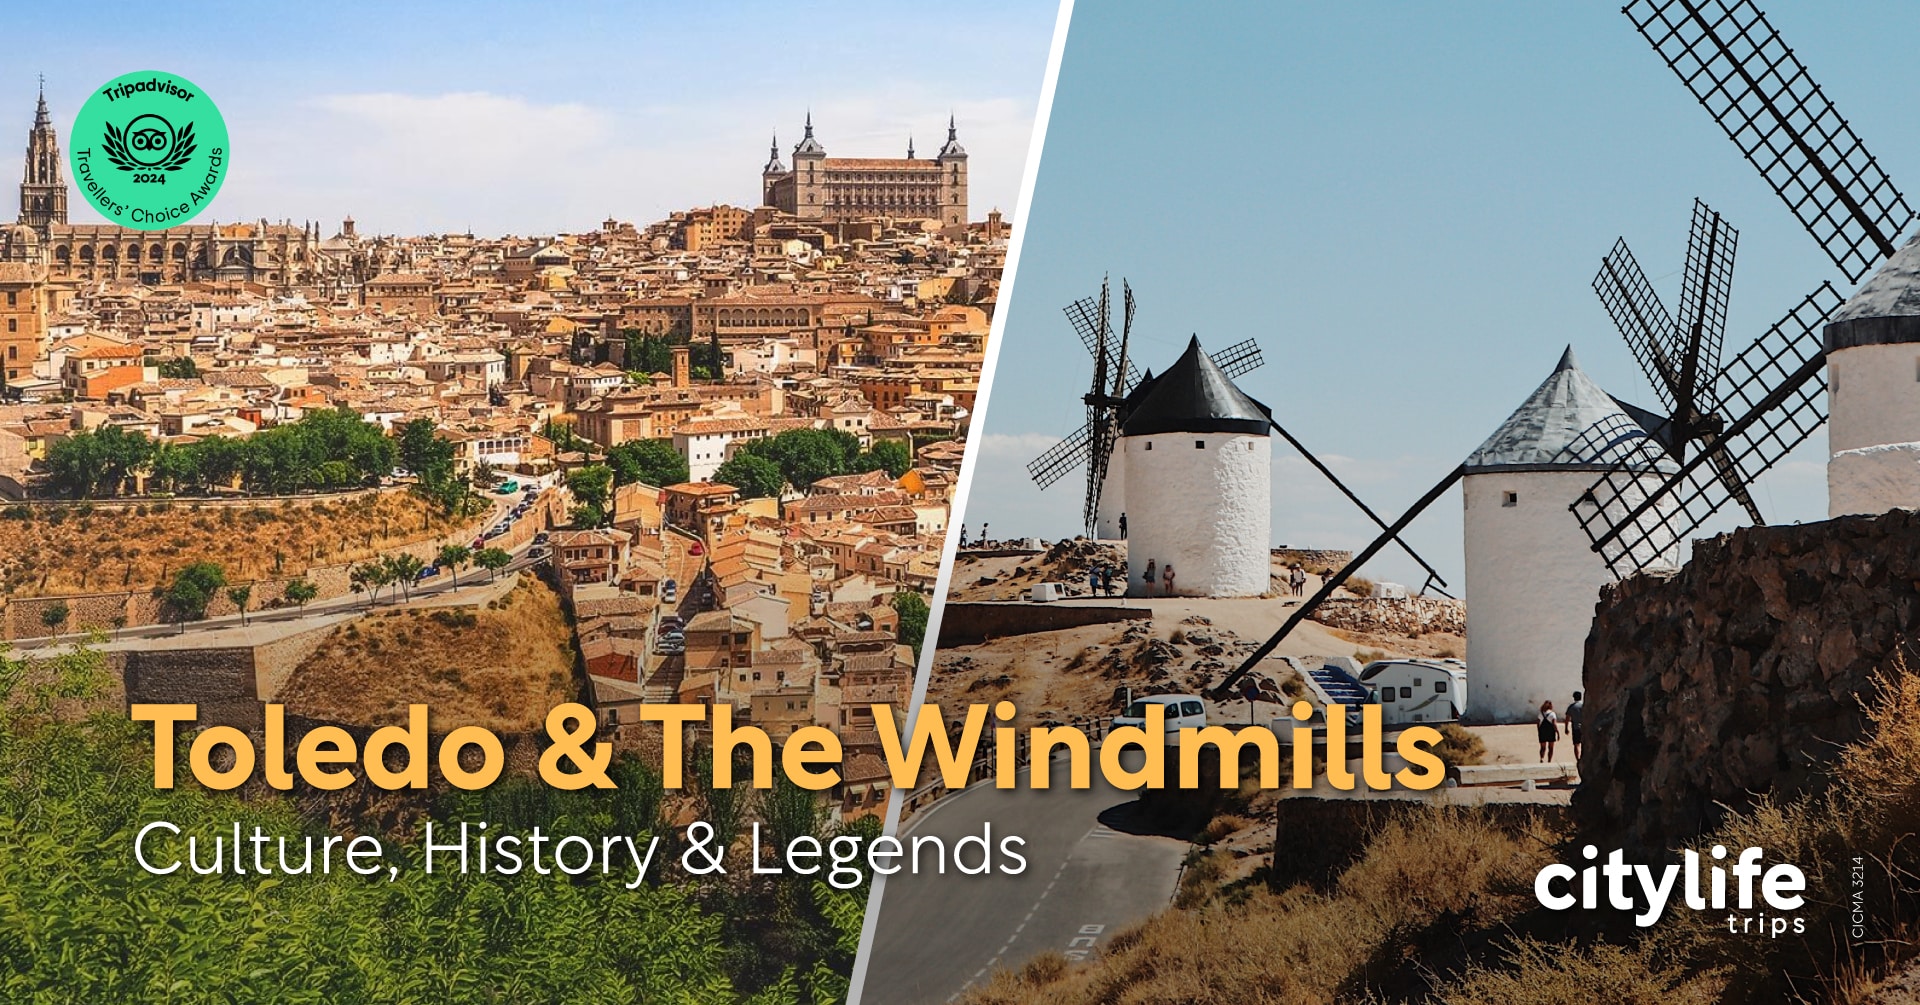 citylife-madrid-toledo-and-the-windmills-featured-image